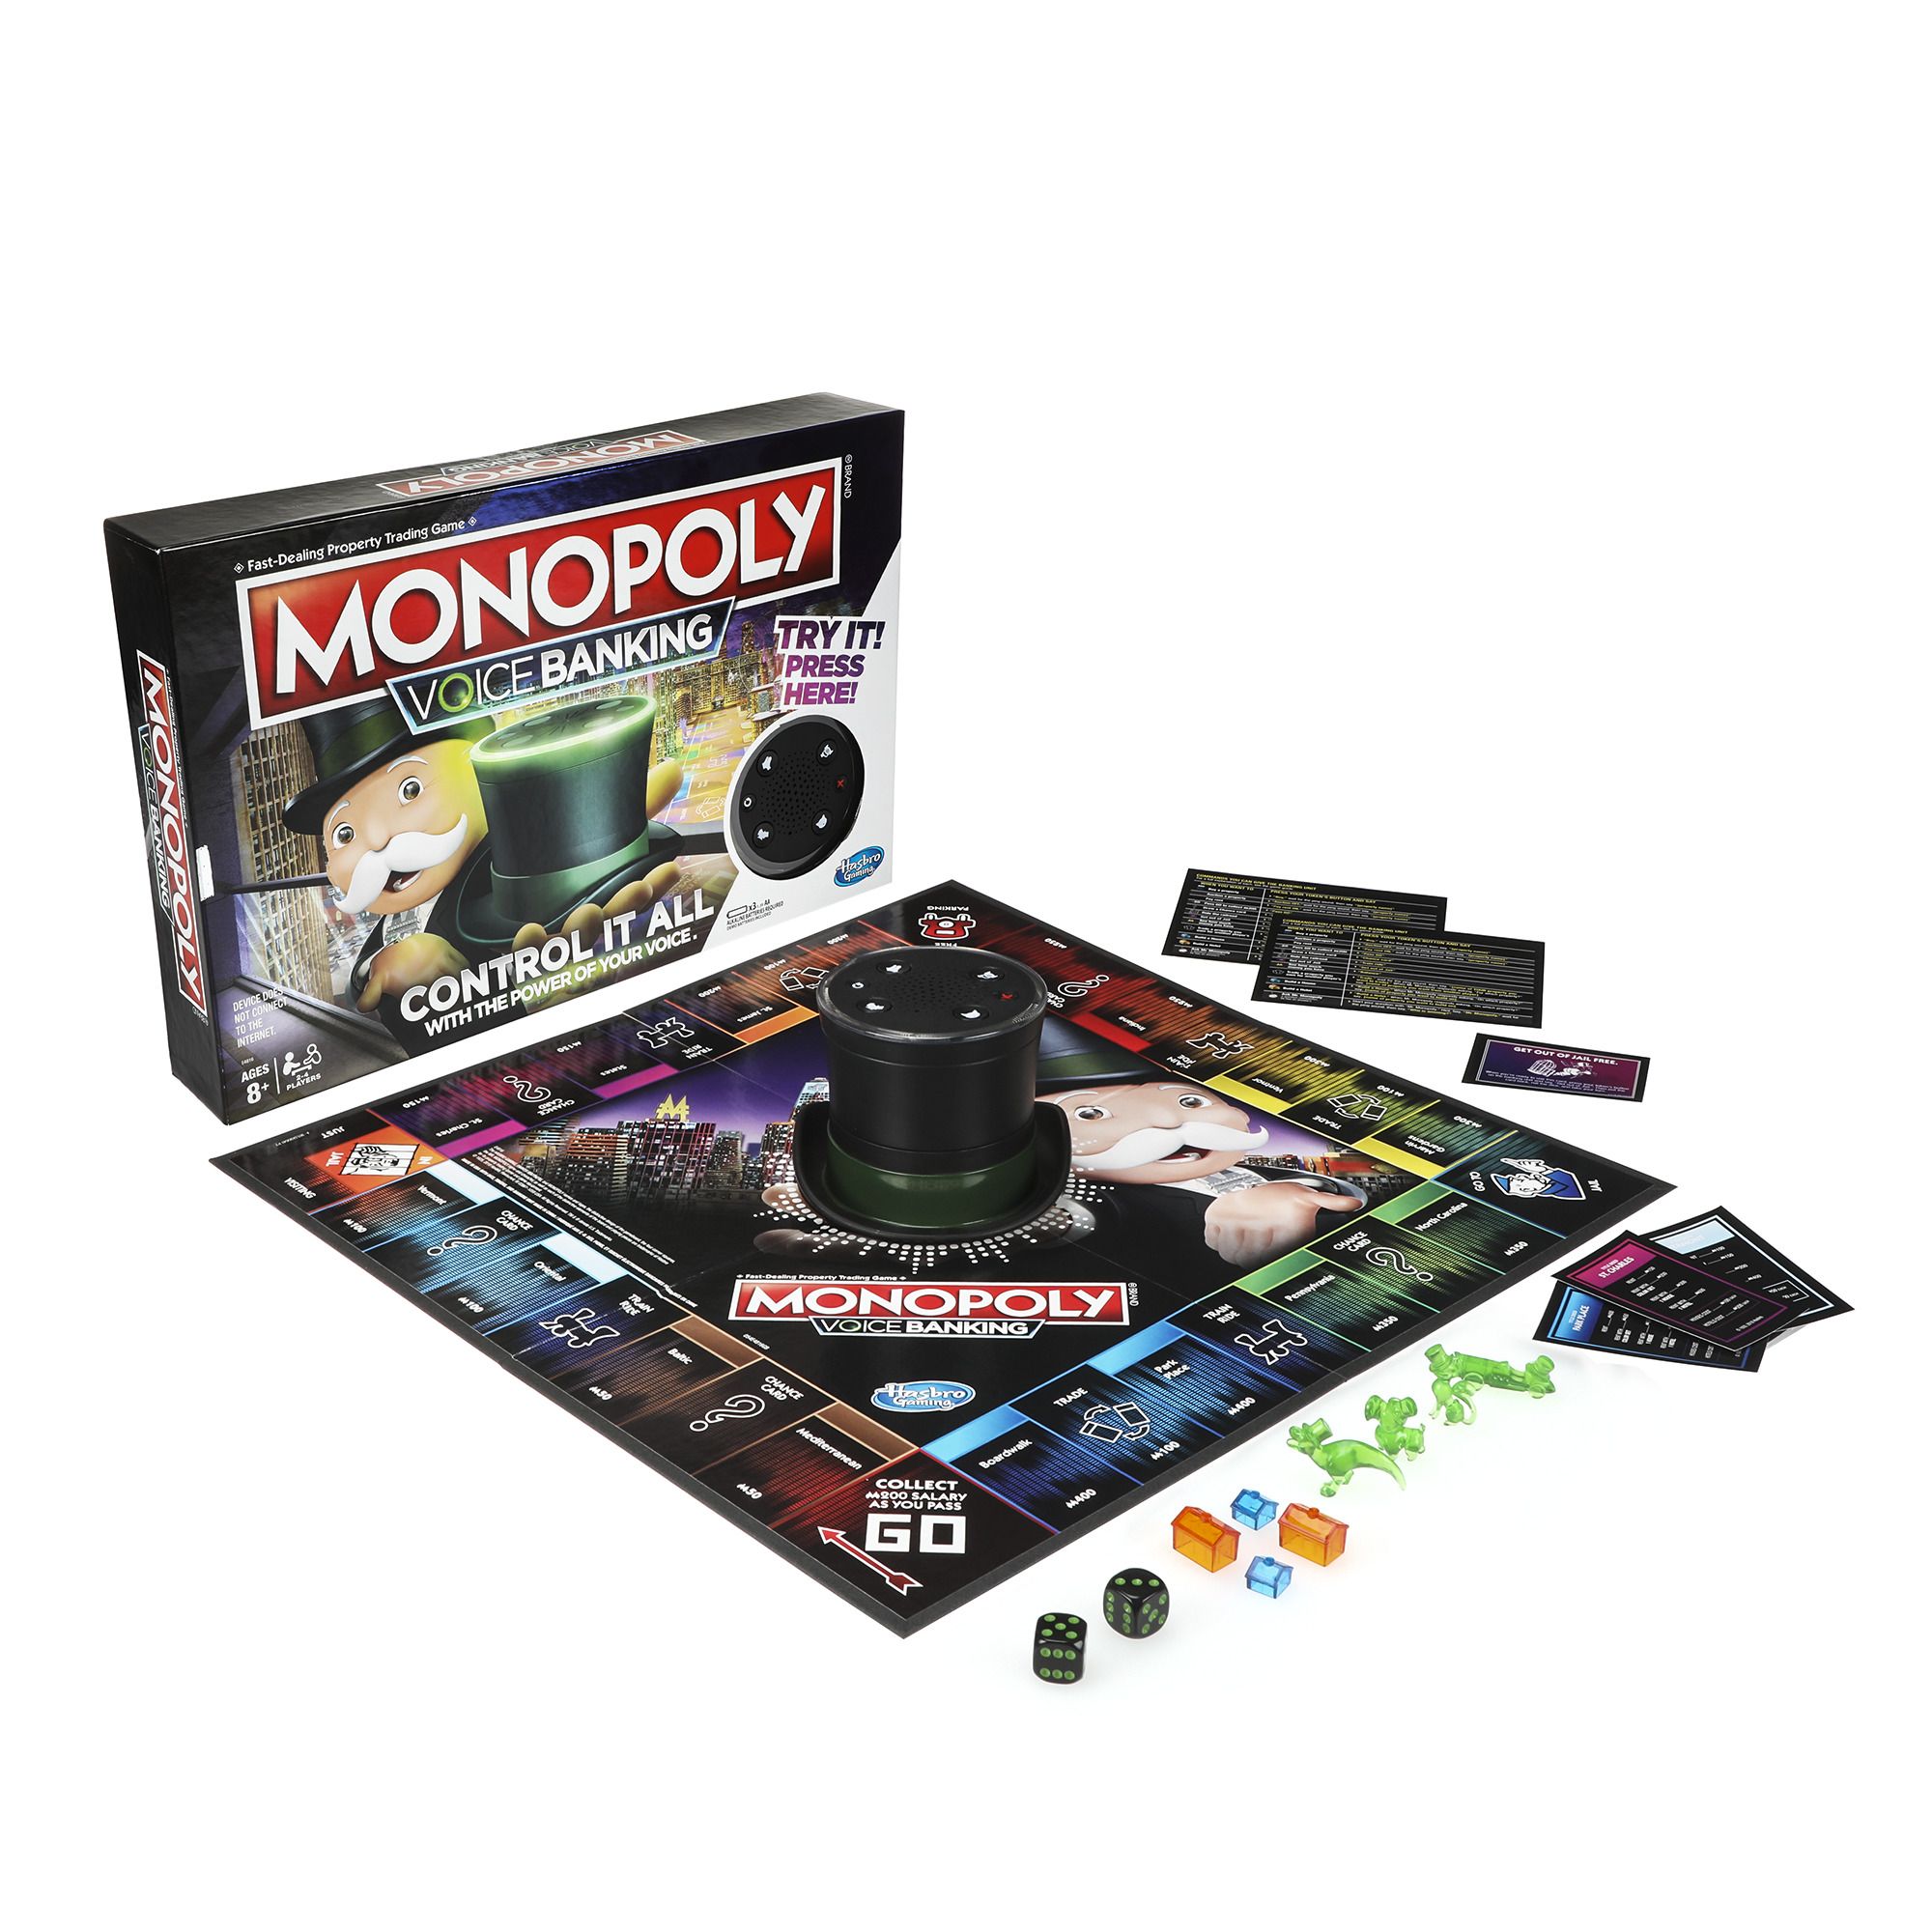 Monopoly Voice Banking Electronic Board Game